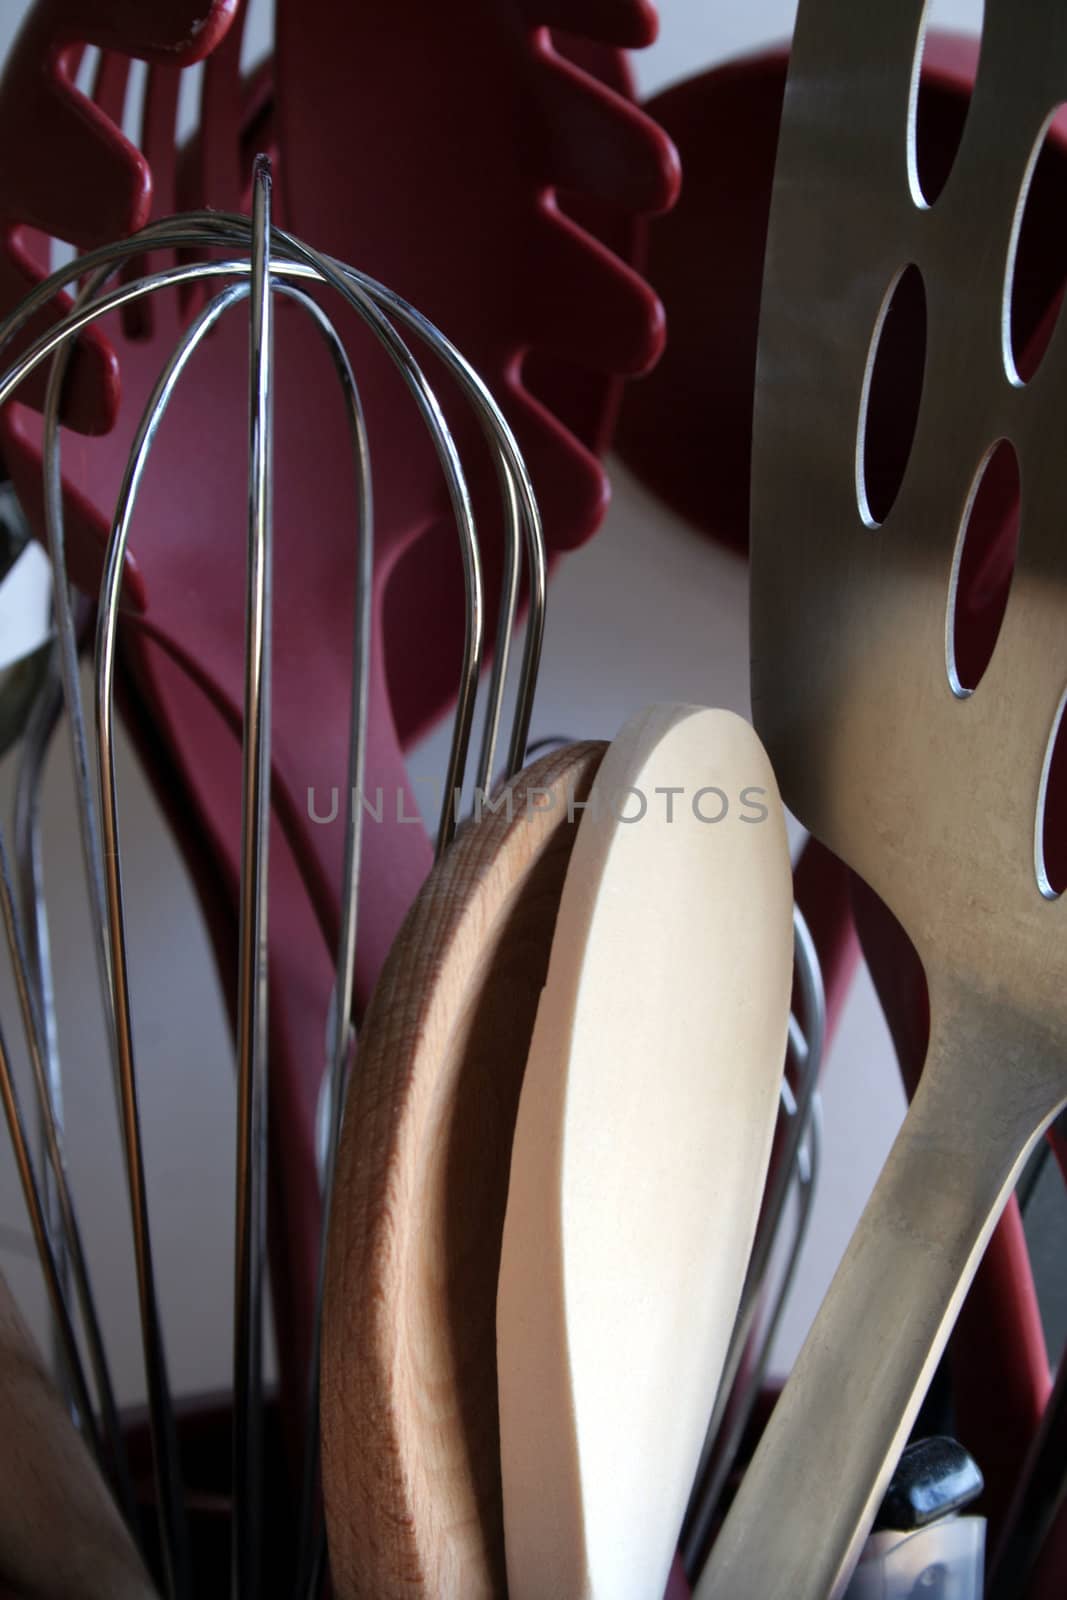 Cooking Tools Up Close
 by ca2hill